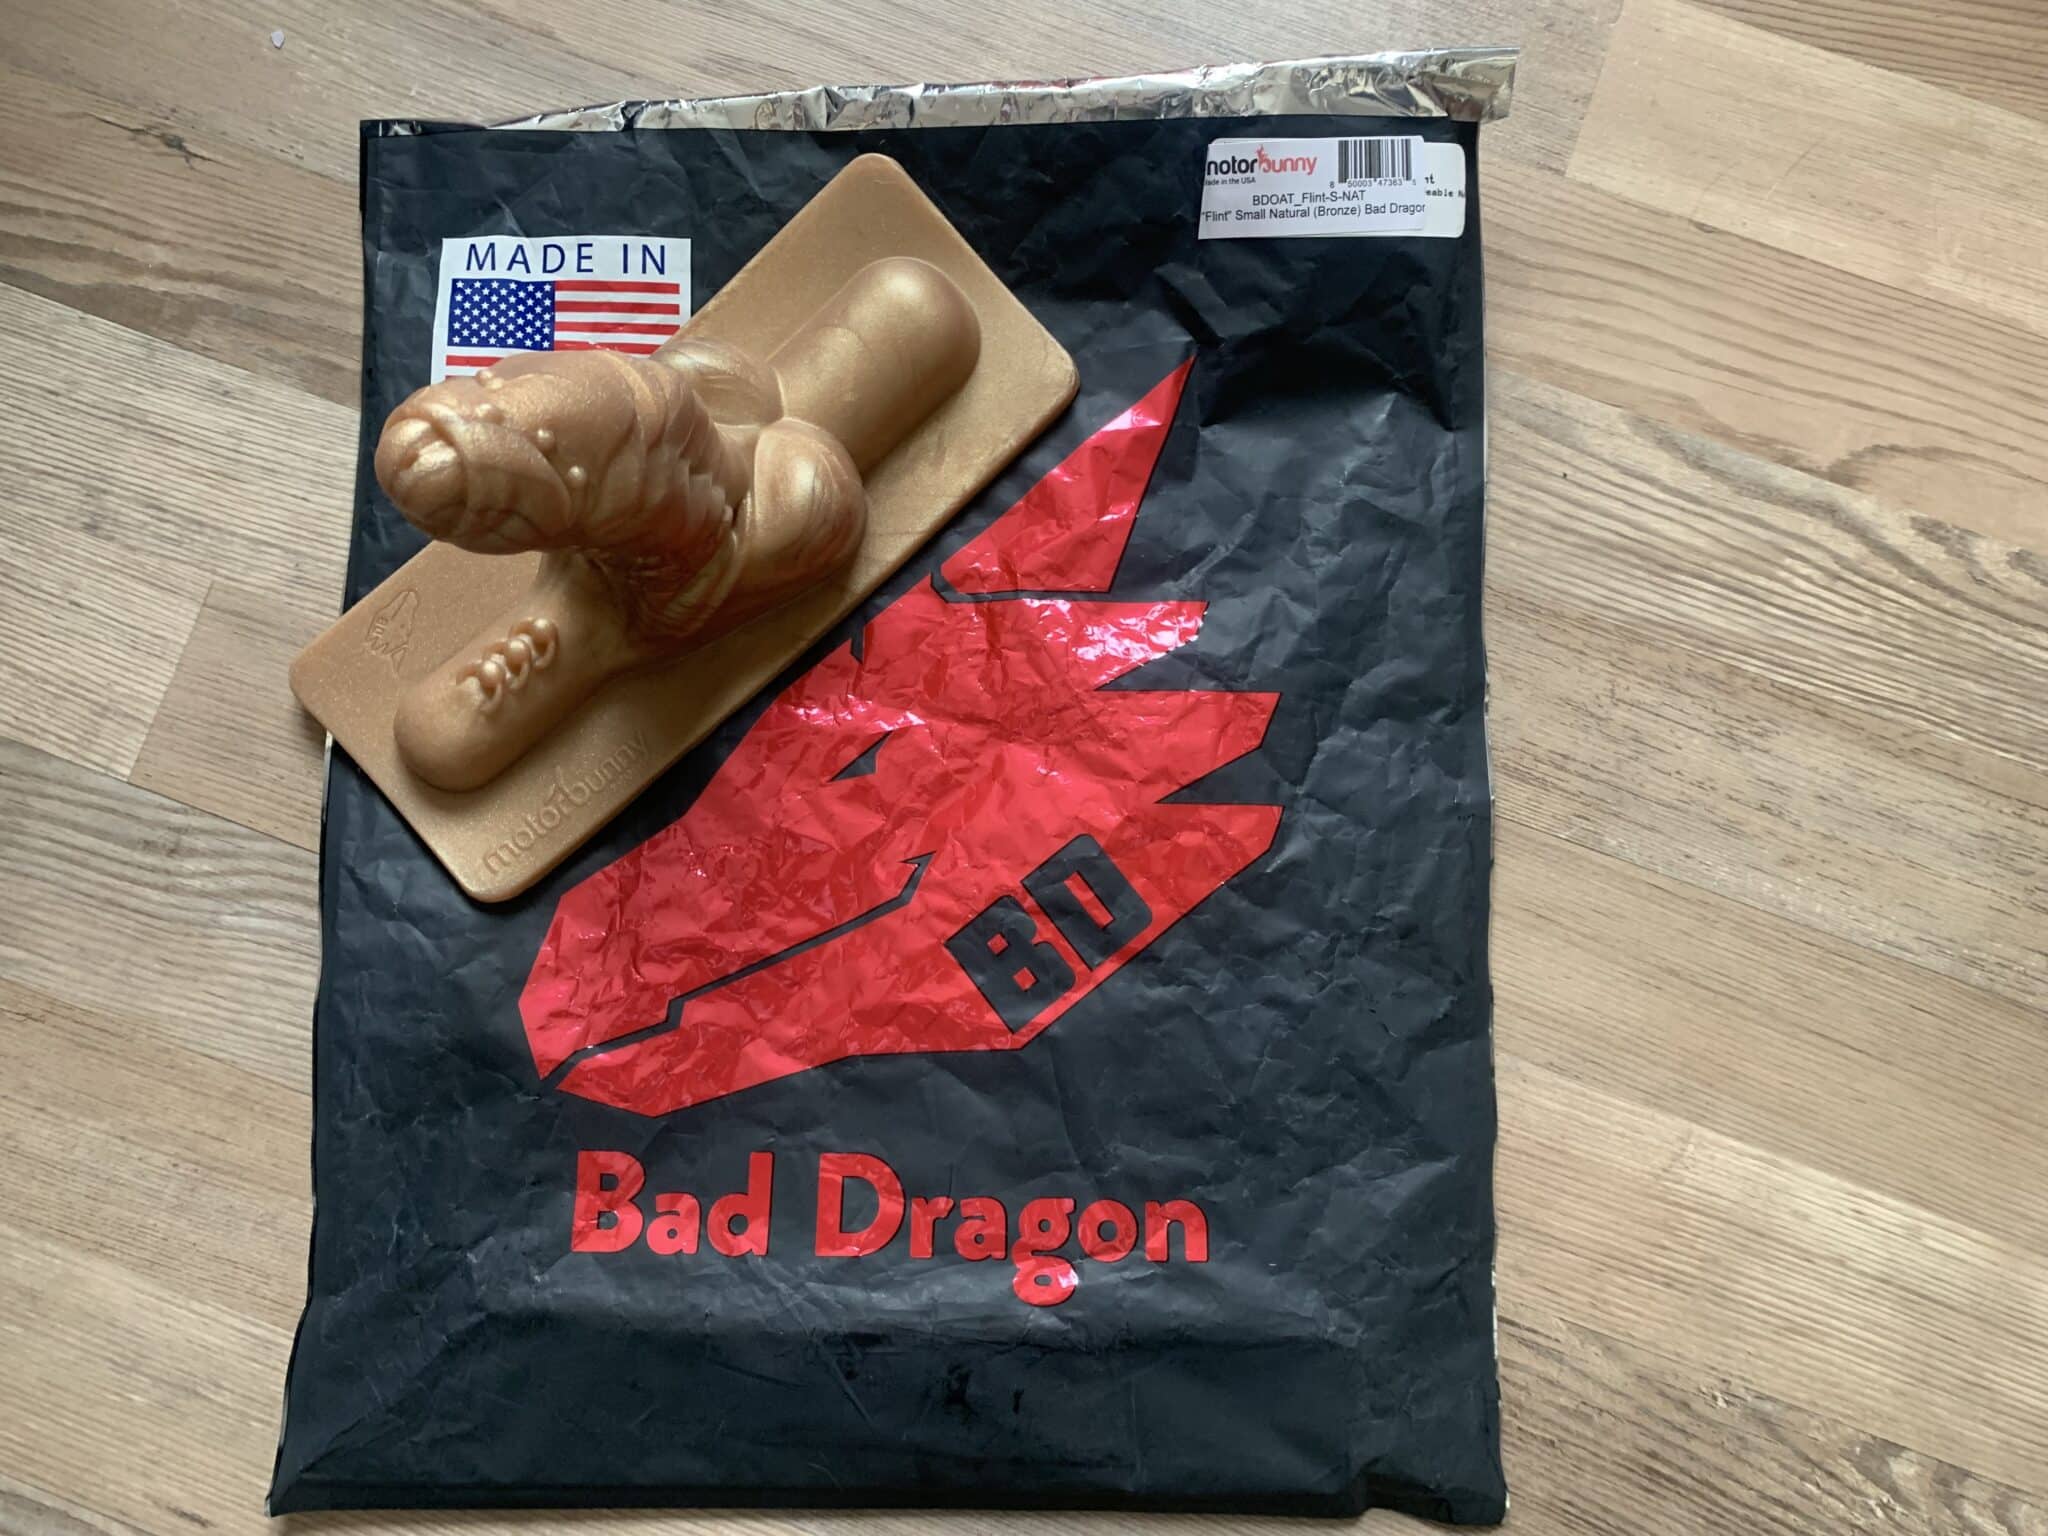 Flint Bad Dragon Motorbunny Attachment - Test & Review The Mystic Bad Dragon Motorbunny Attachment - Test & Review: Standout Quality or Shortcomings?